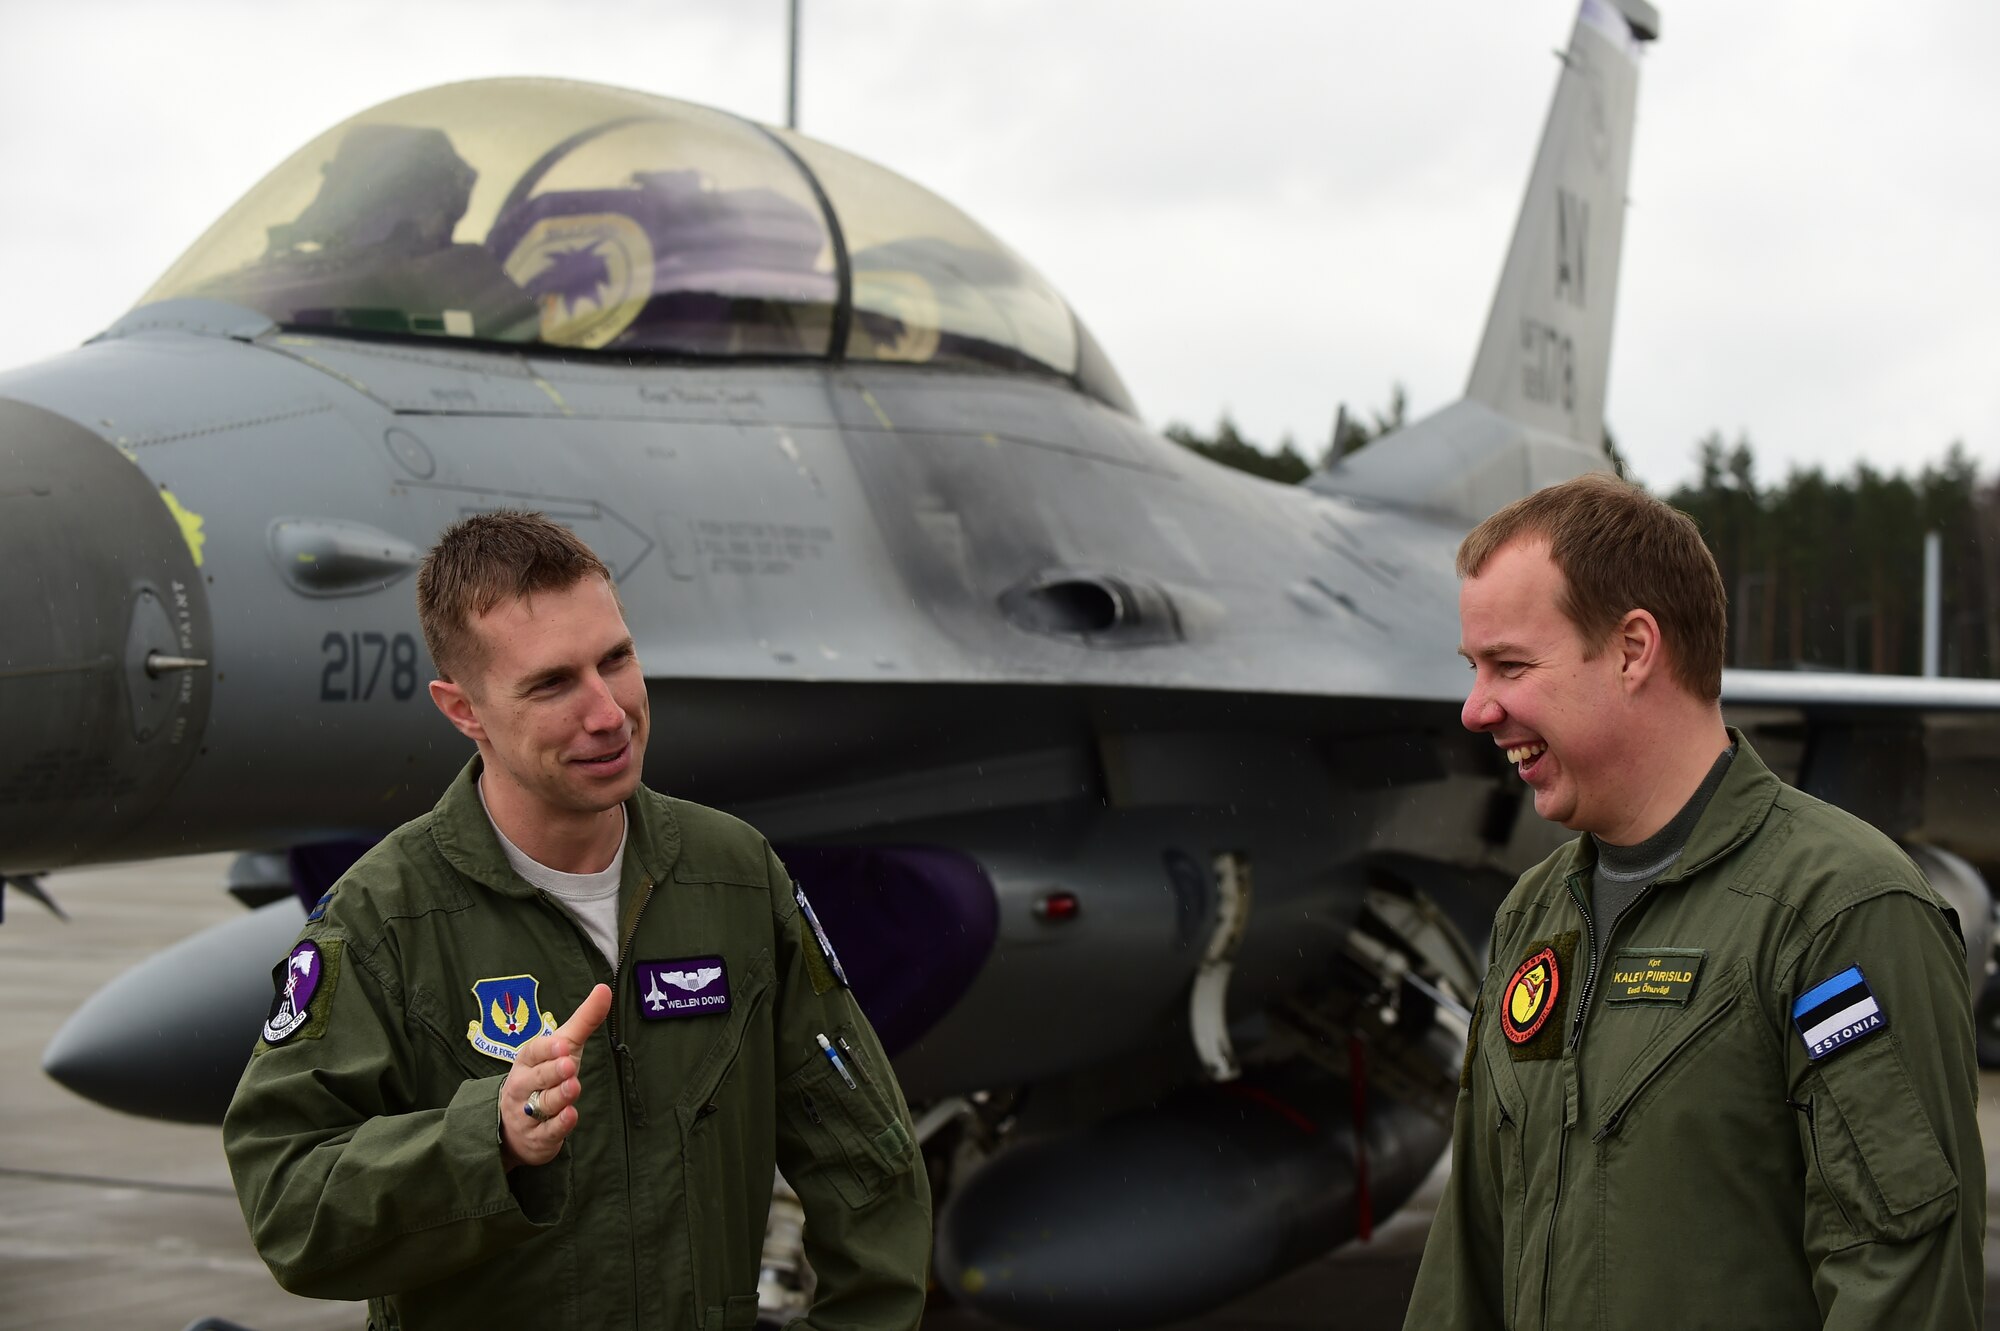 U.S. Air Force Capt. Thomas Dowd and Capt. Kalev Piirisild, Amari FTD project officers for the U.S. and Estonia, respectively, converse in front of an F-16 Fighting Falcon at Ämari Air Base, Estonia on April 1, 2015. At the invitation of the Estonian government, approximately 300 U.S. personnel from the 31st Fighter Wing are participating in bilateral training with Estonians to maintain joint readiness while building interoperability capabilities. (U.S. Air Force photo by Tech. Sgt. Chrissy Best/Released)